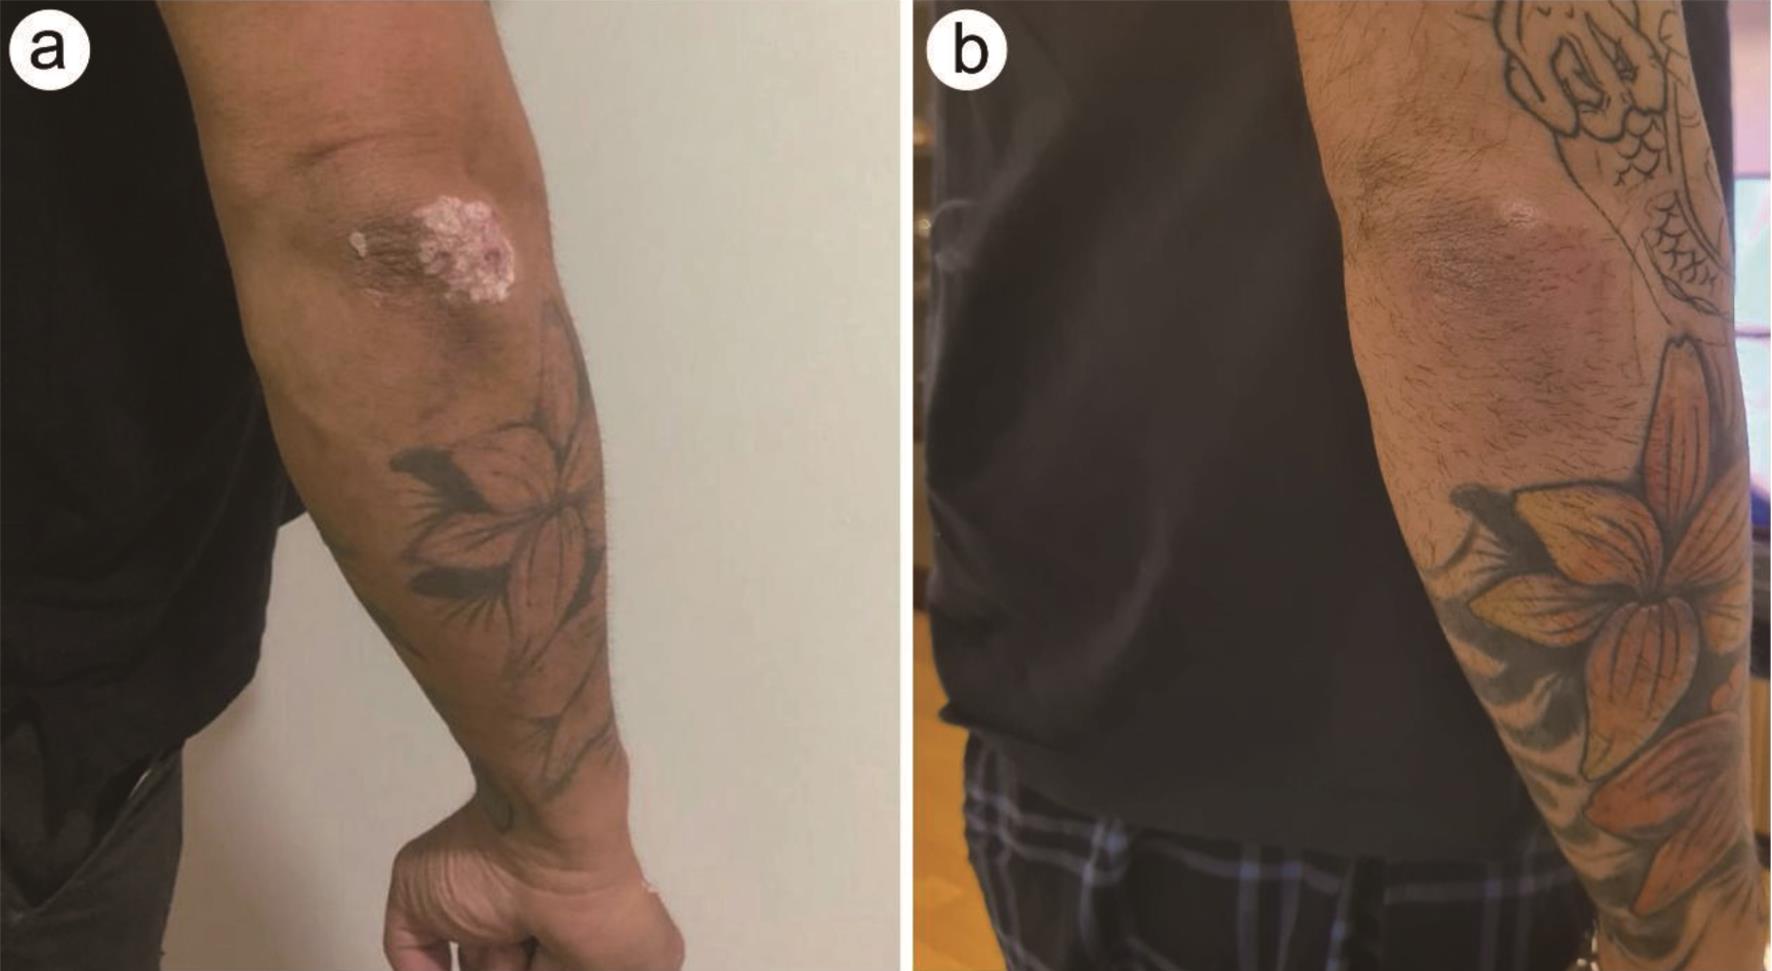 Elbow of the patient before and after the application of “Psorisbye” with 1 week between images.